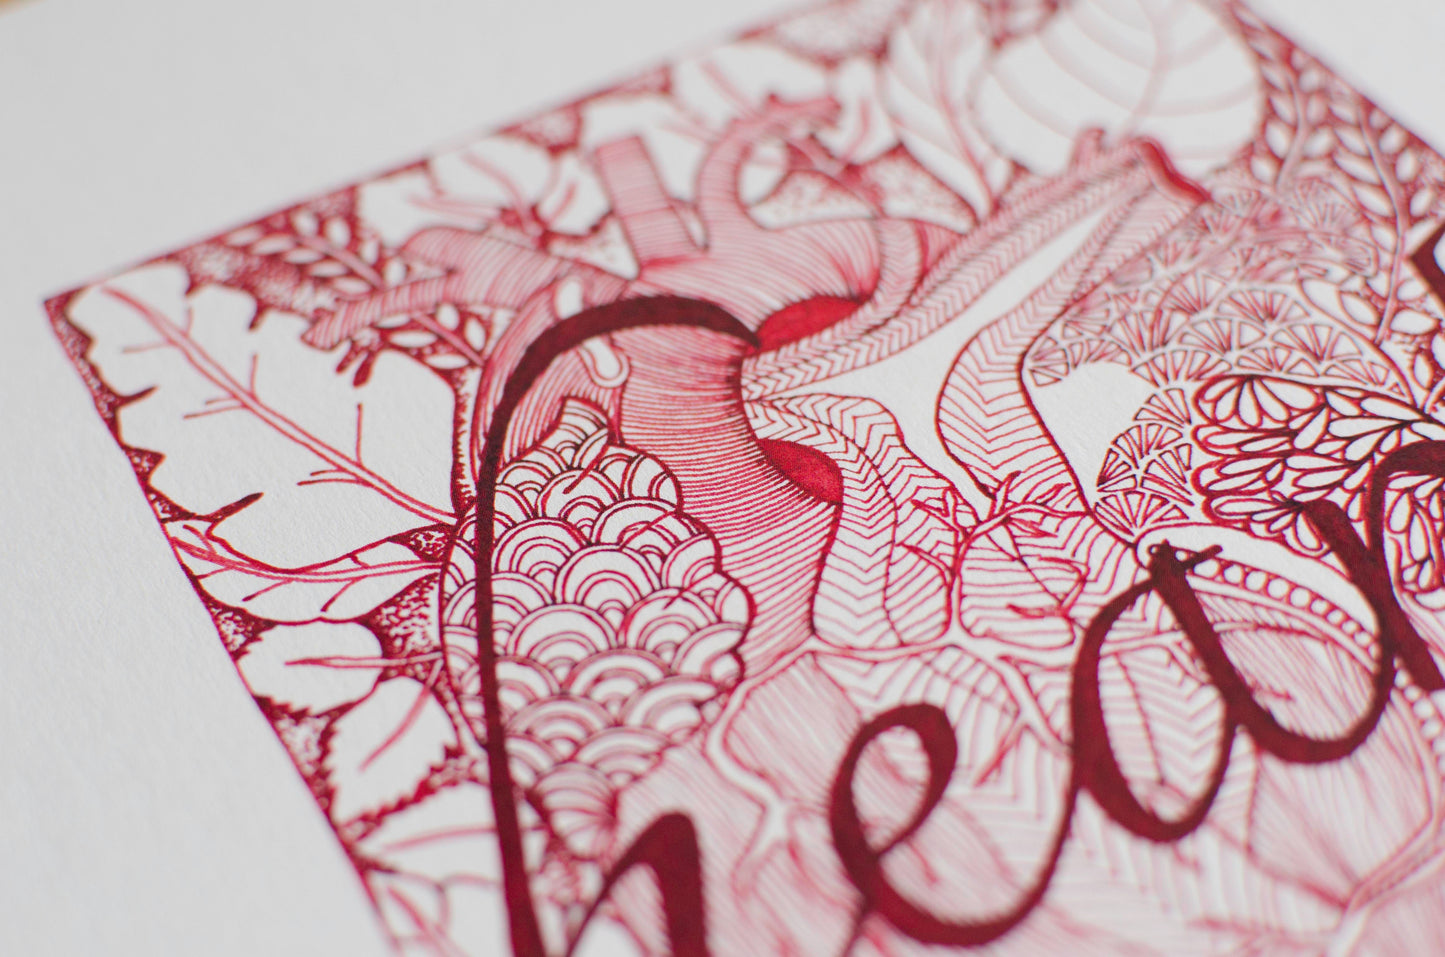 heart written in the middle in red ink, drawing of a biological heart in the background with lots of leaves, dainty patterns, and dotted art, laurateodoriart